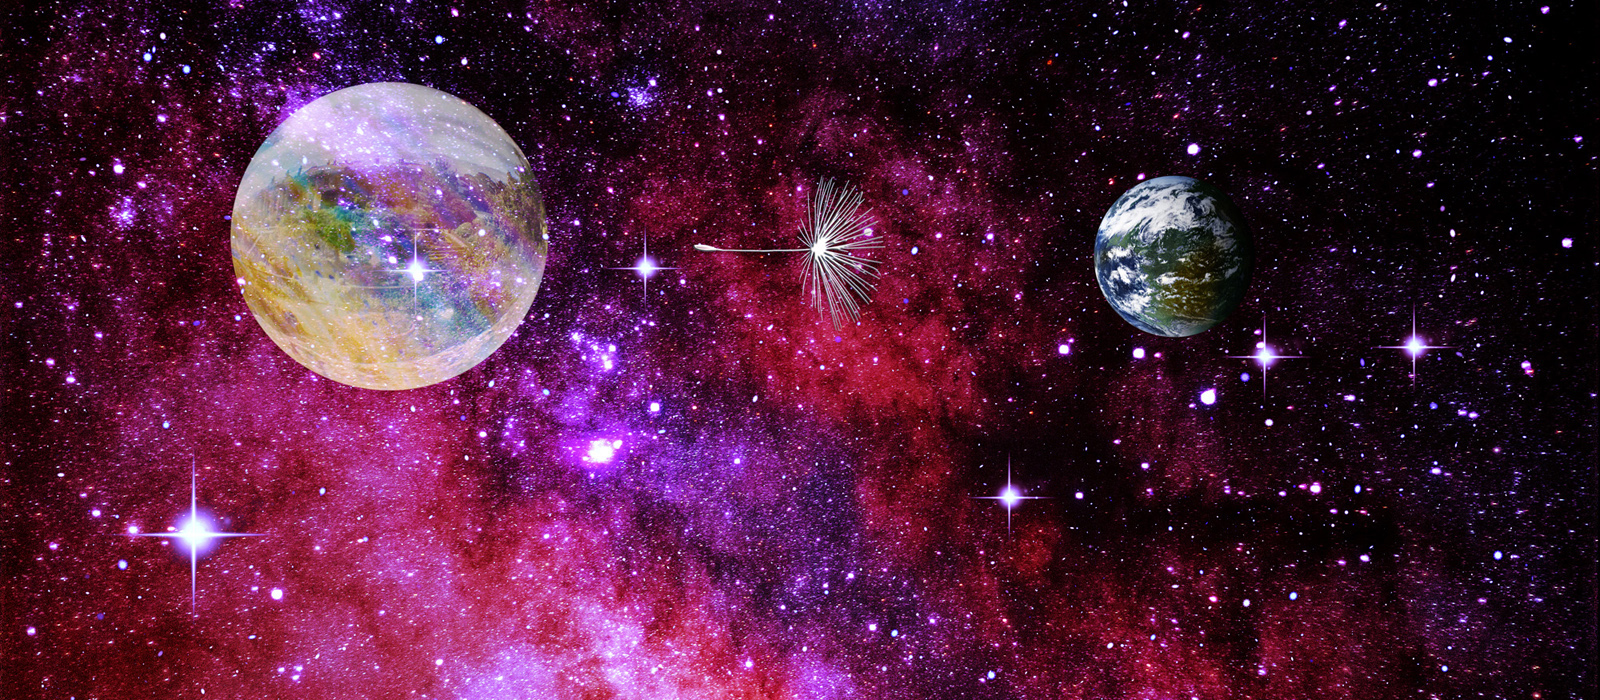 A fanciful nebula space shot in dark and light reds, purples and blue stars, with a stylized "bubble" that contains a city on the left, floating in space, a metallic dandelion seed in the middle, and the planet Lon on the right. The picture has a lot of depth.